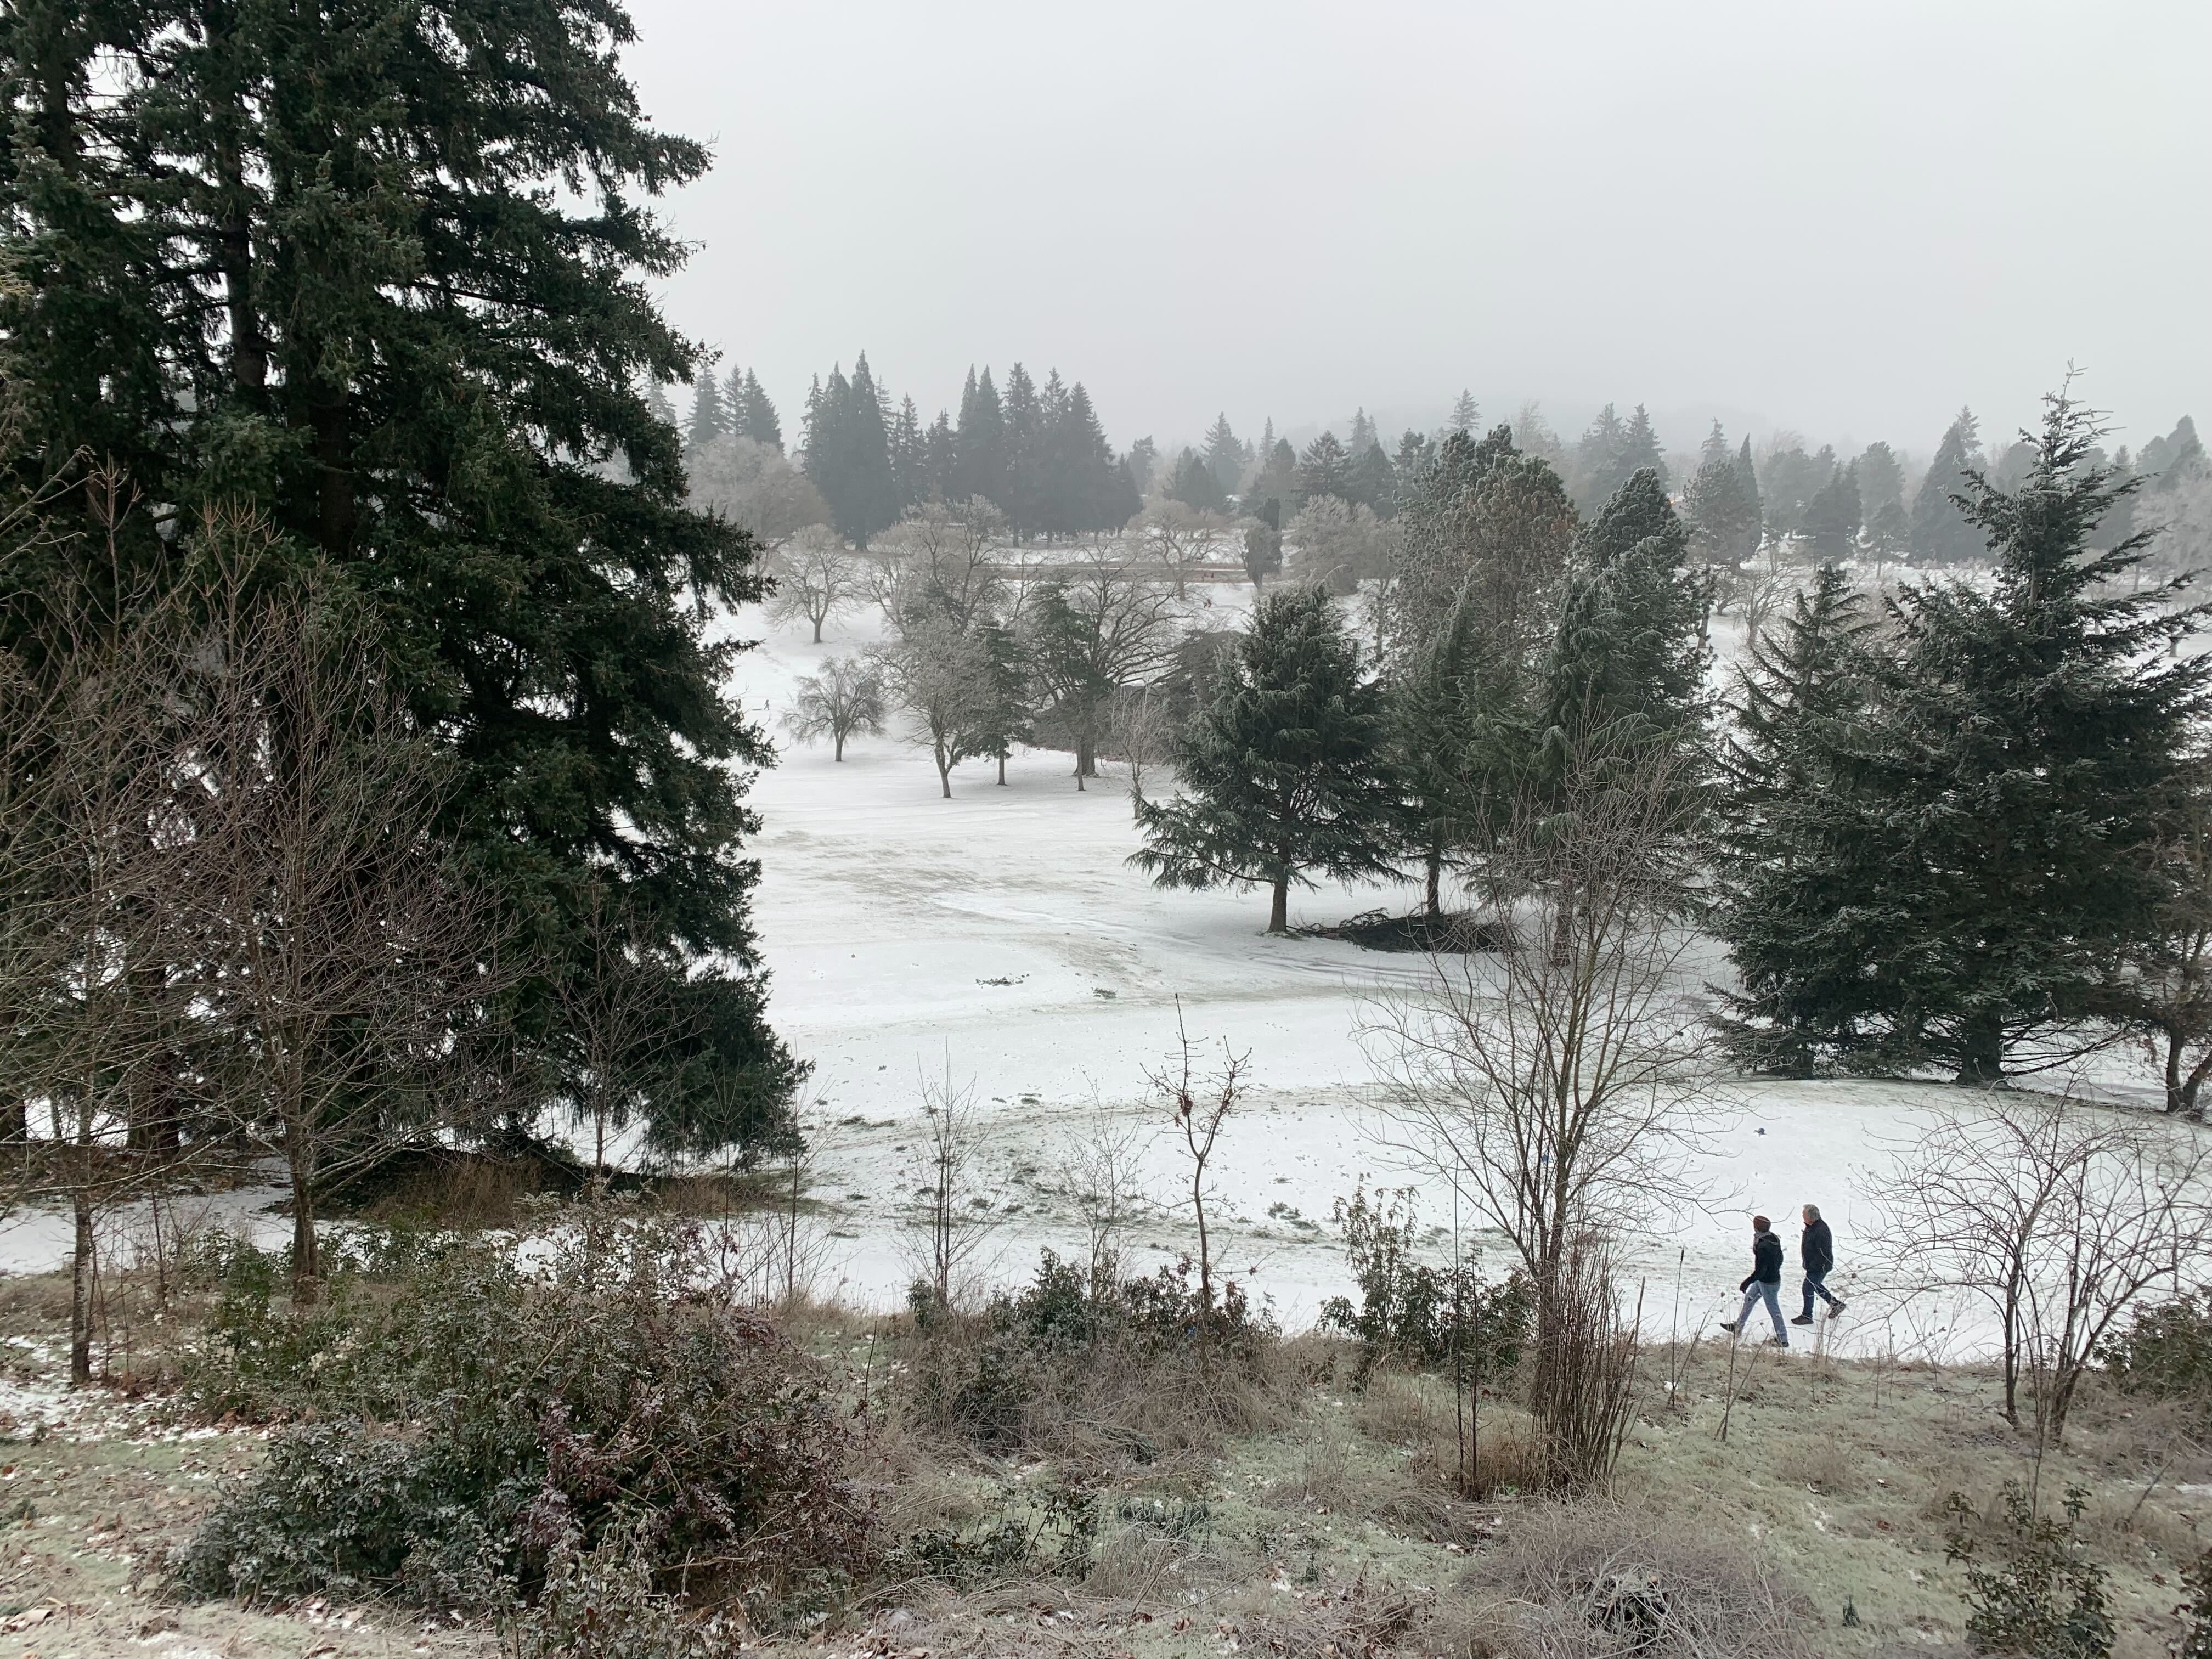 Two people take a walk through the snow at Rose City Golf Course in Portland, Oregon on Friday, Dec. 23, 2022. The city of Portland attempted to pitch the site as an alternative for an MLB ballpark.